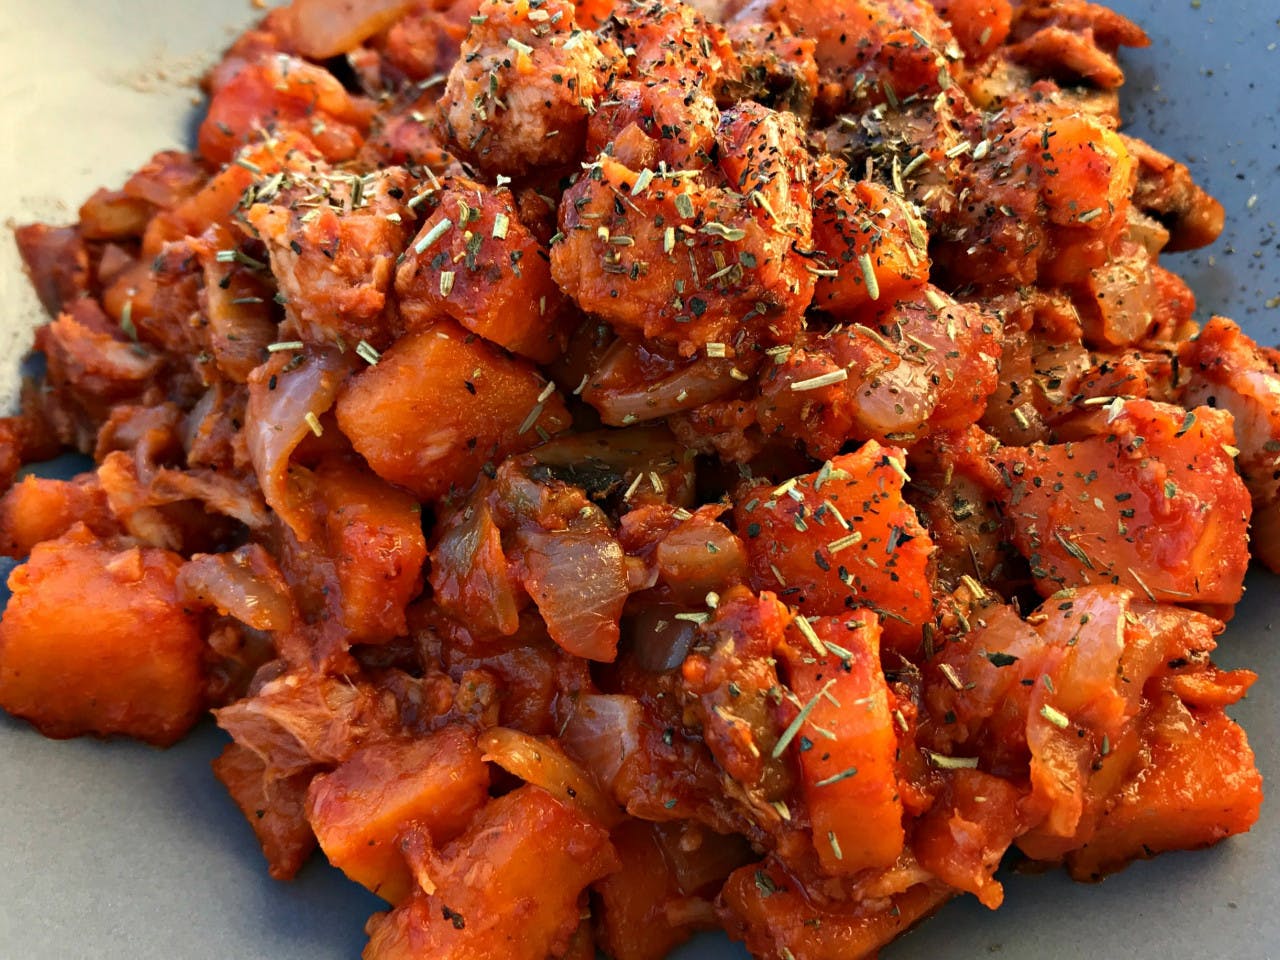 One-pot dish with sweet potato cubes and tuna